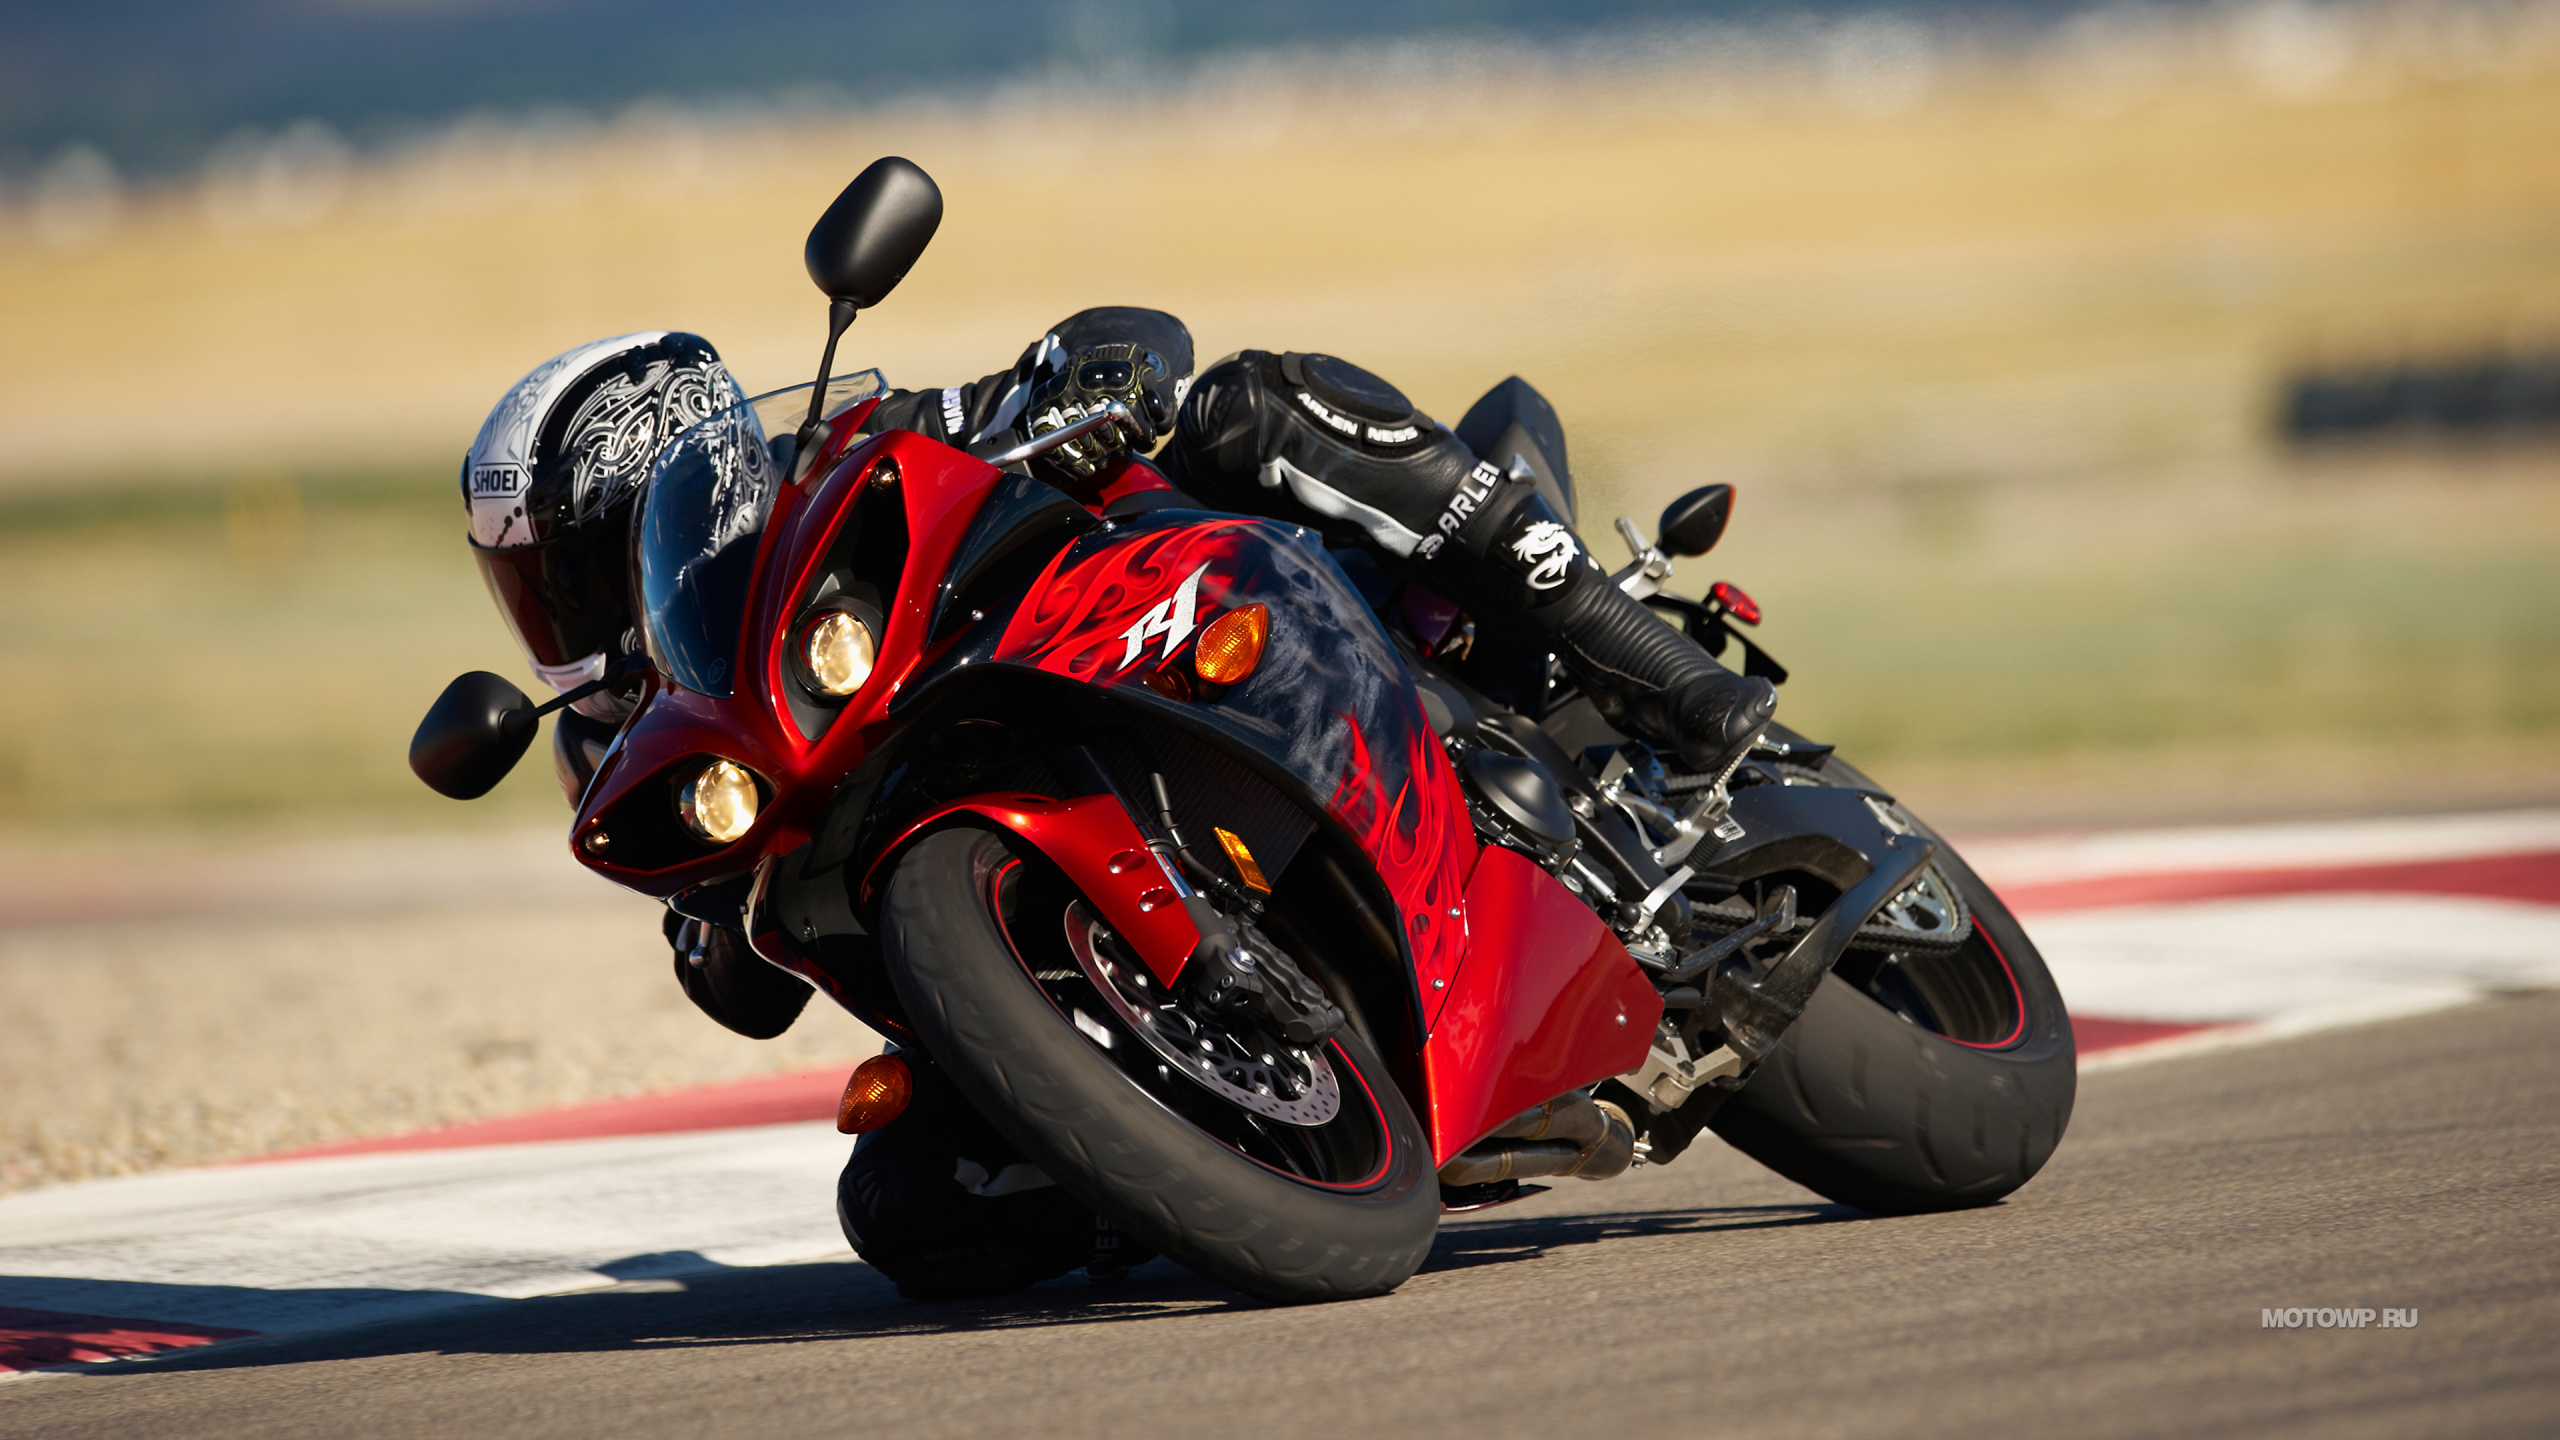 Red and Black Sports Bike on Road During Daytime. Wallpaper in 2560x1440 Resolution